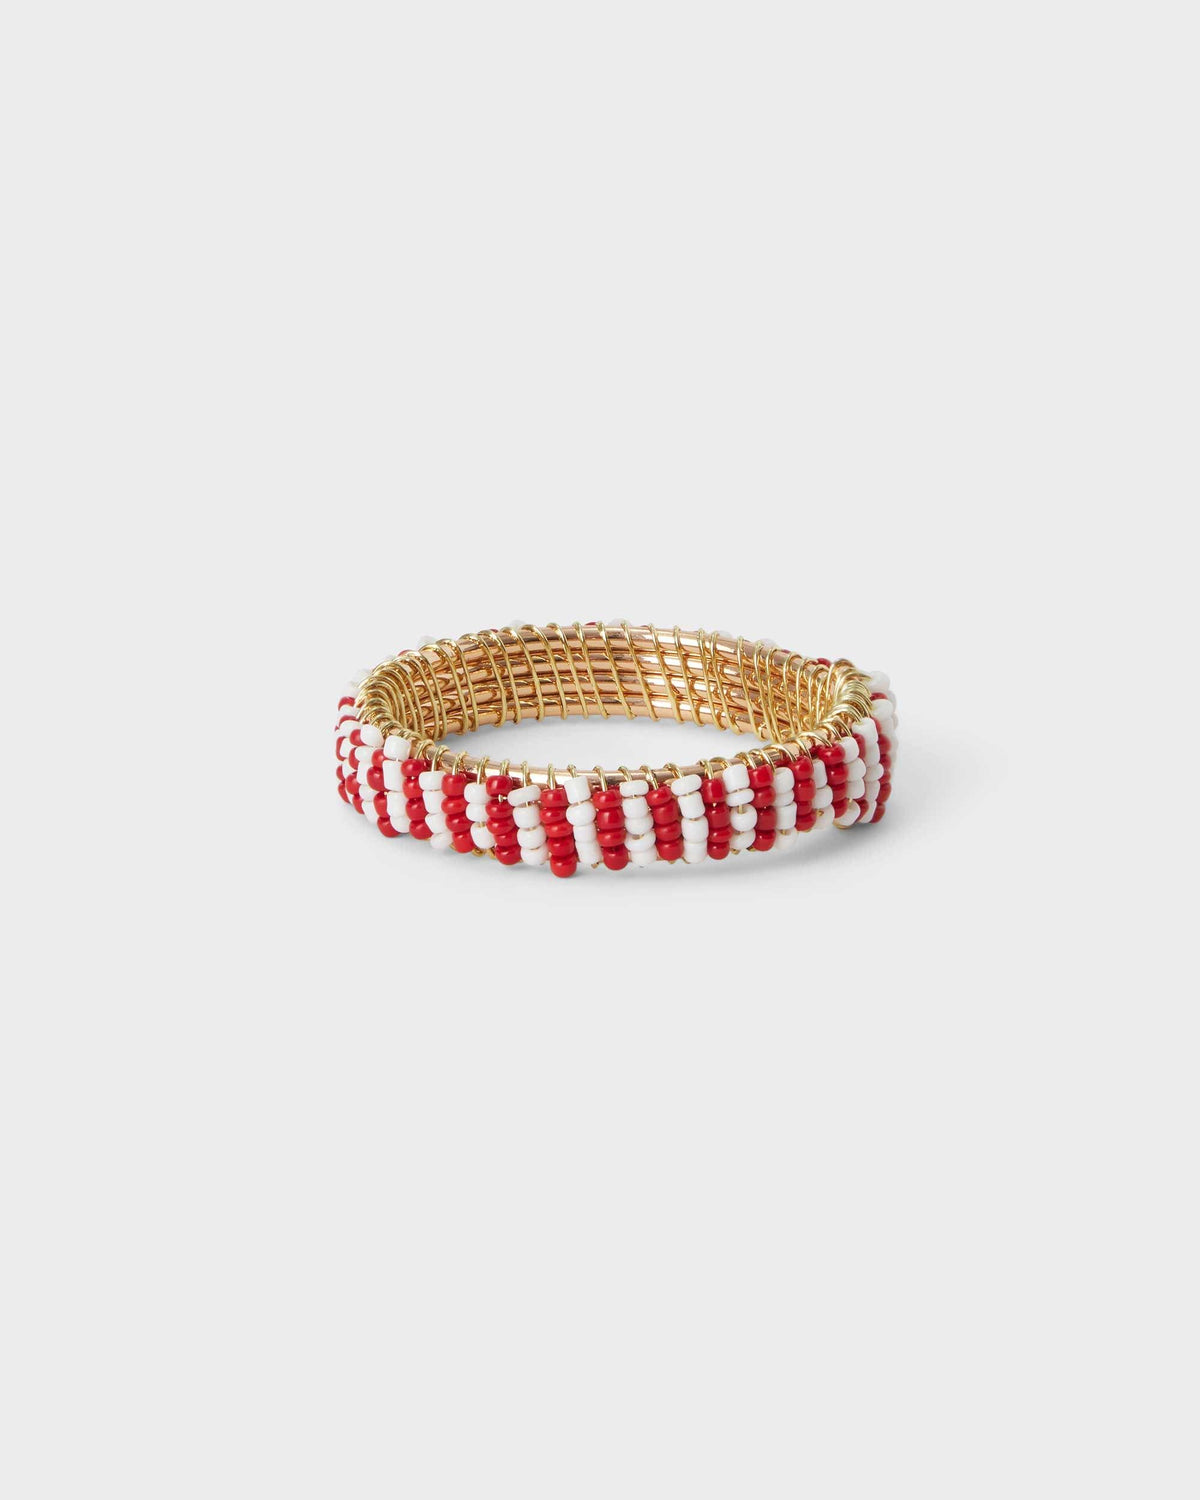 Napkin Ring - Red and White beads - Von Home